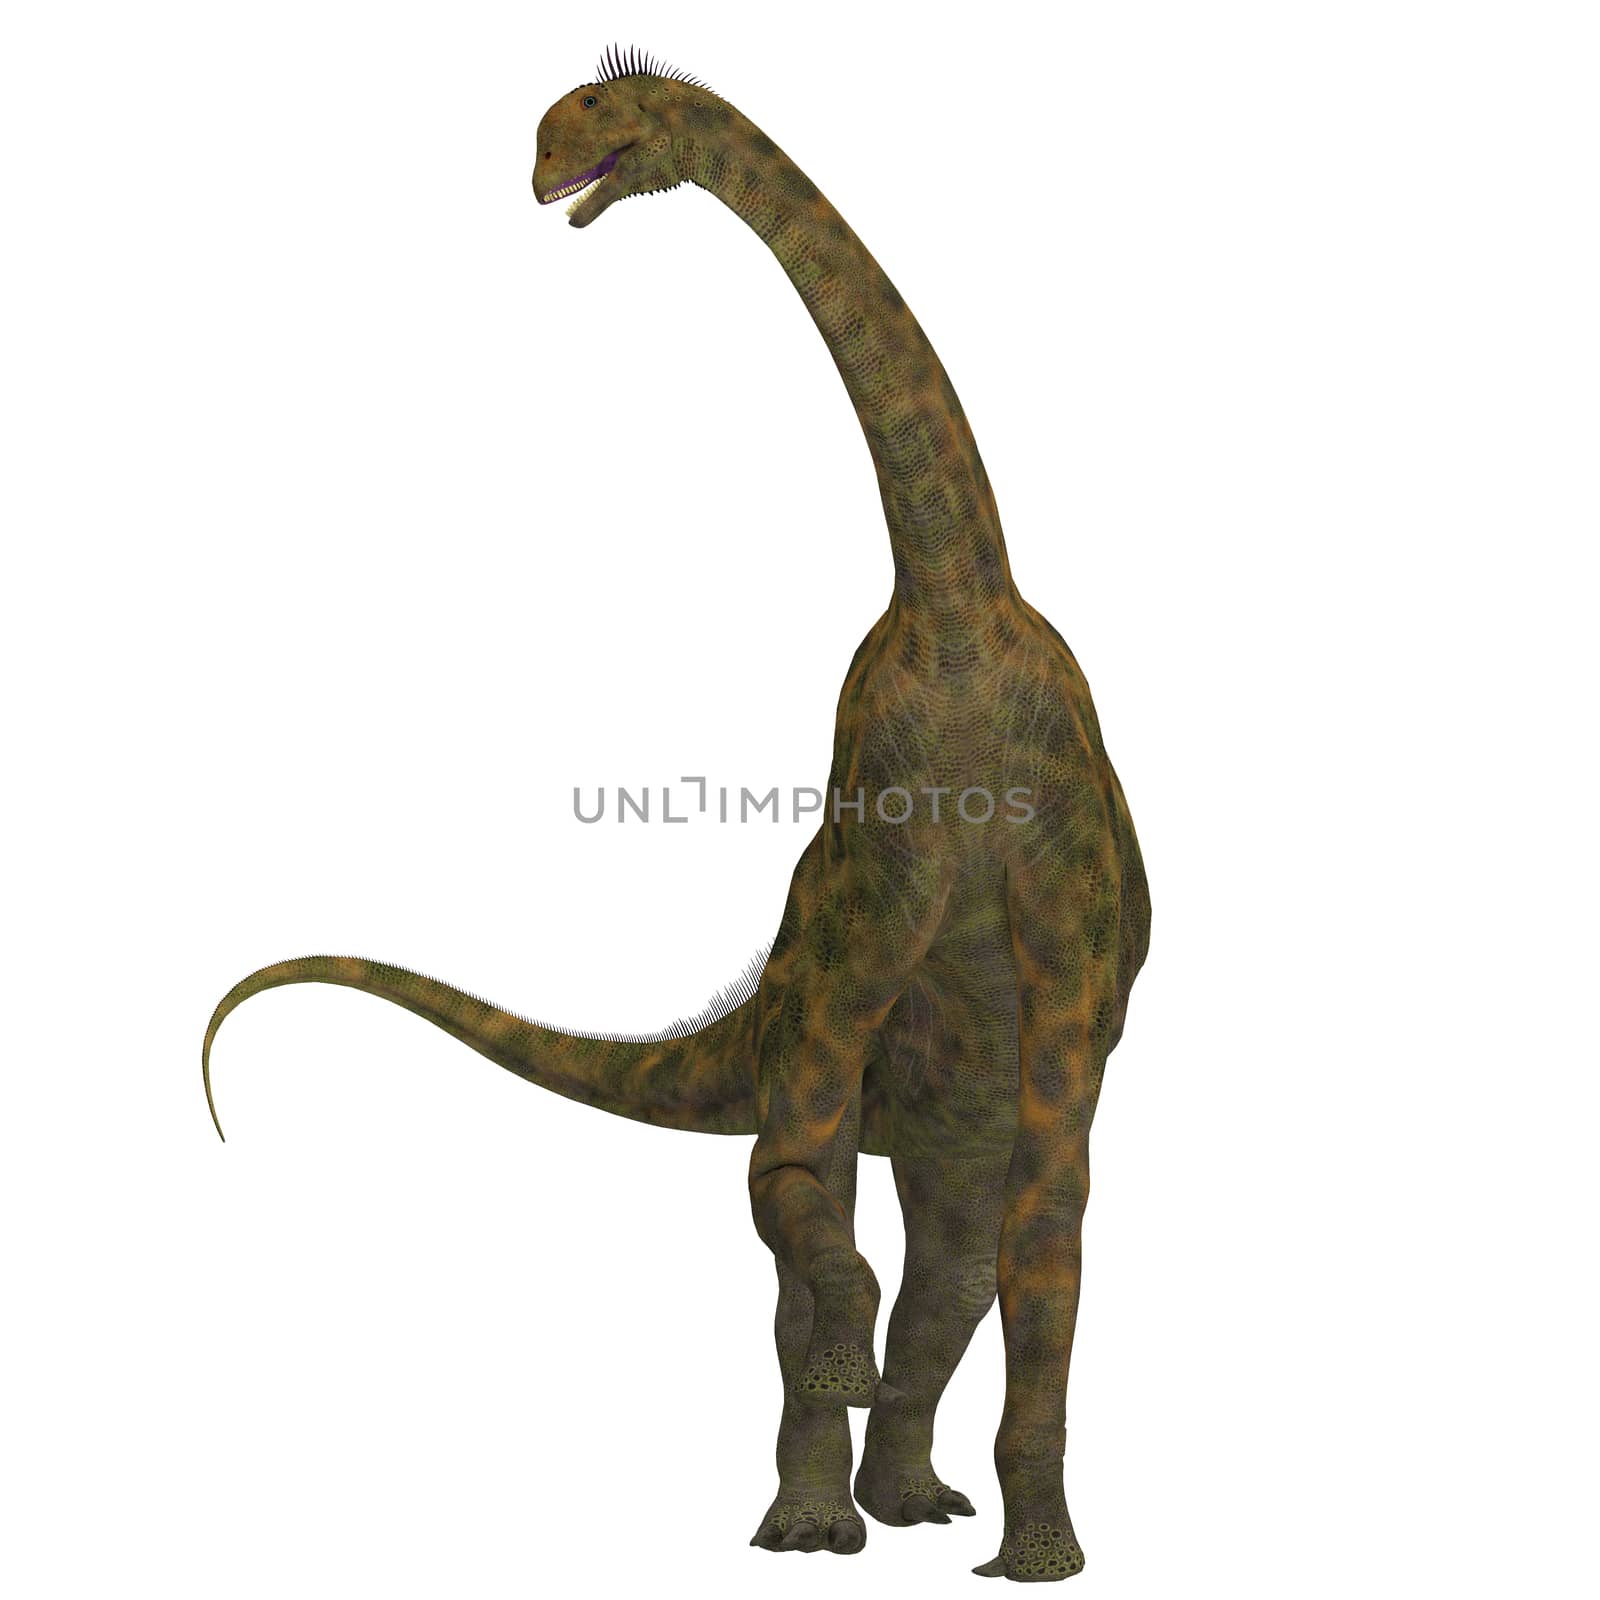 Atlasaurus was a large herbivorous dinosaur that lived in the Jurassic Period of Morocco, North Africa.